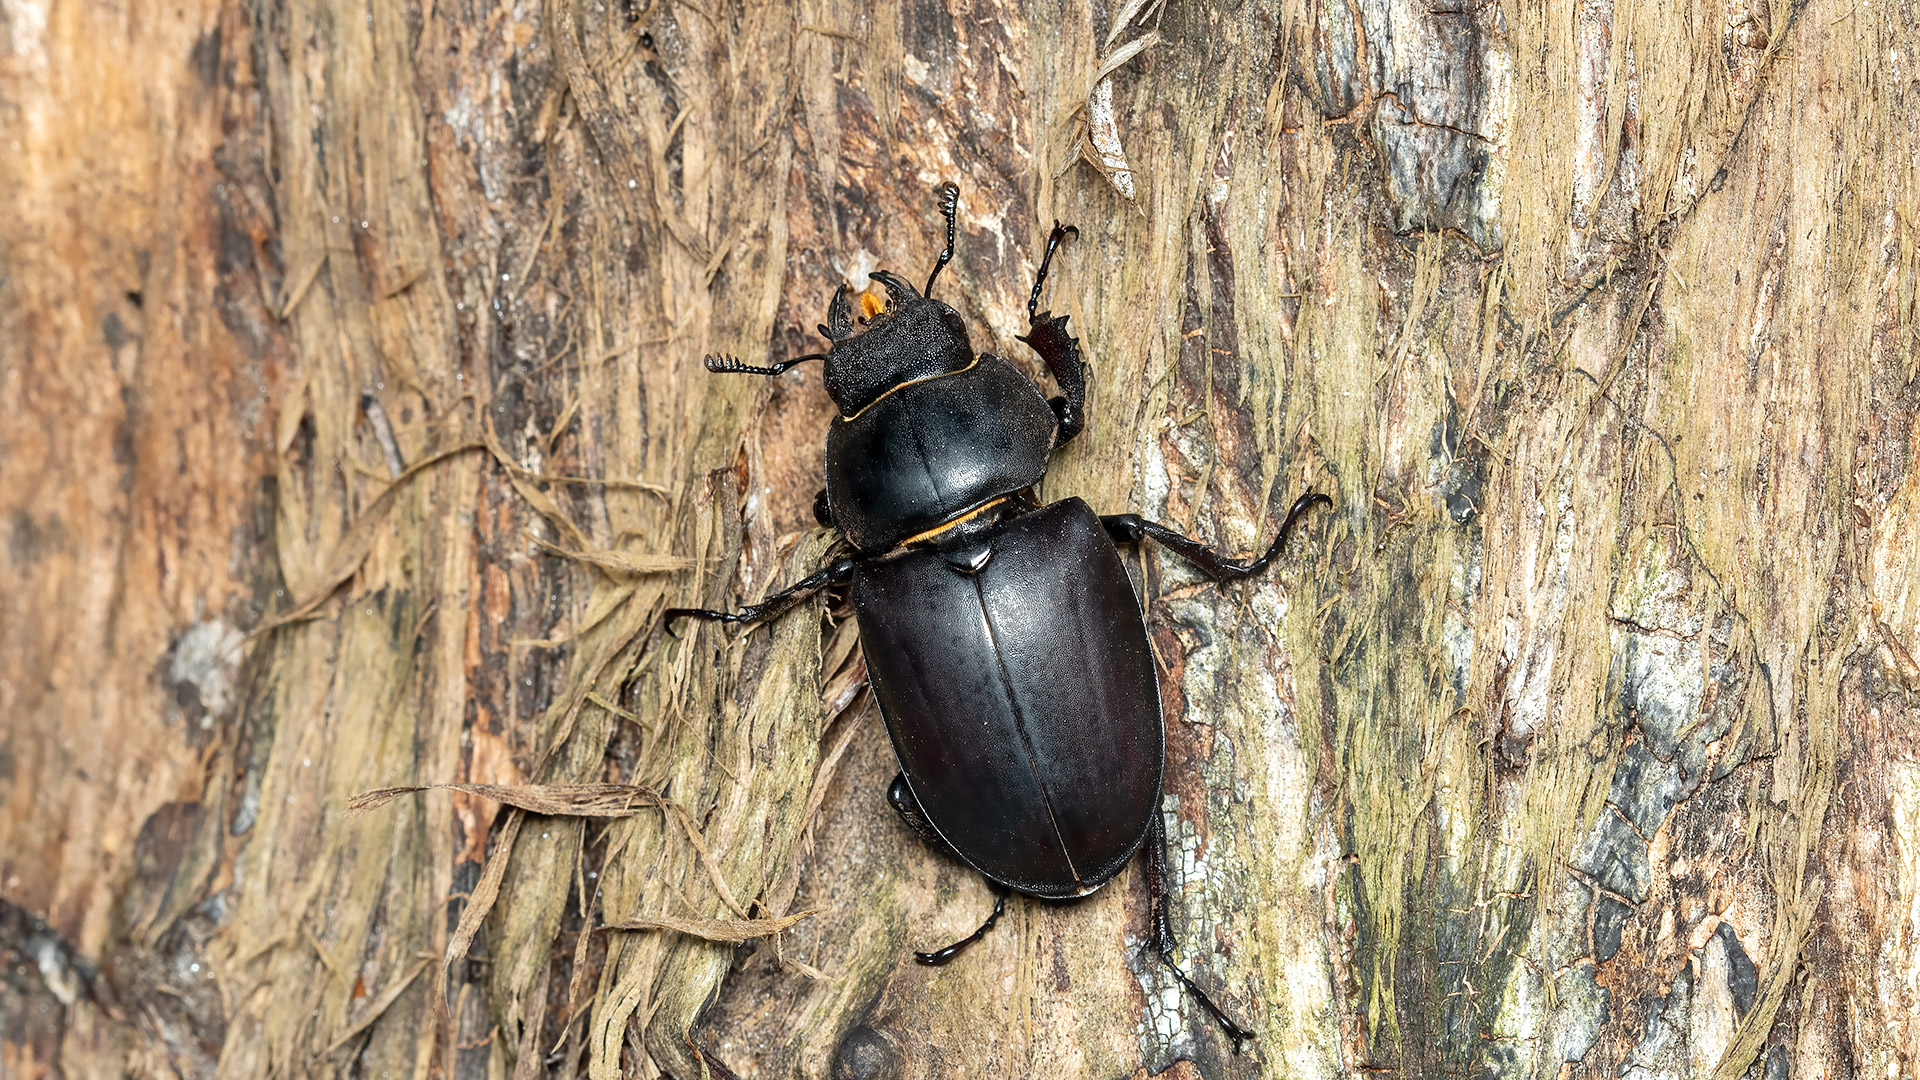 Beetle with giant antler like mandibles, body wide and big. Colors are black and dark red brown. Female.